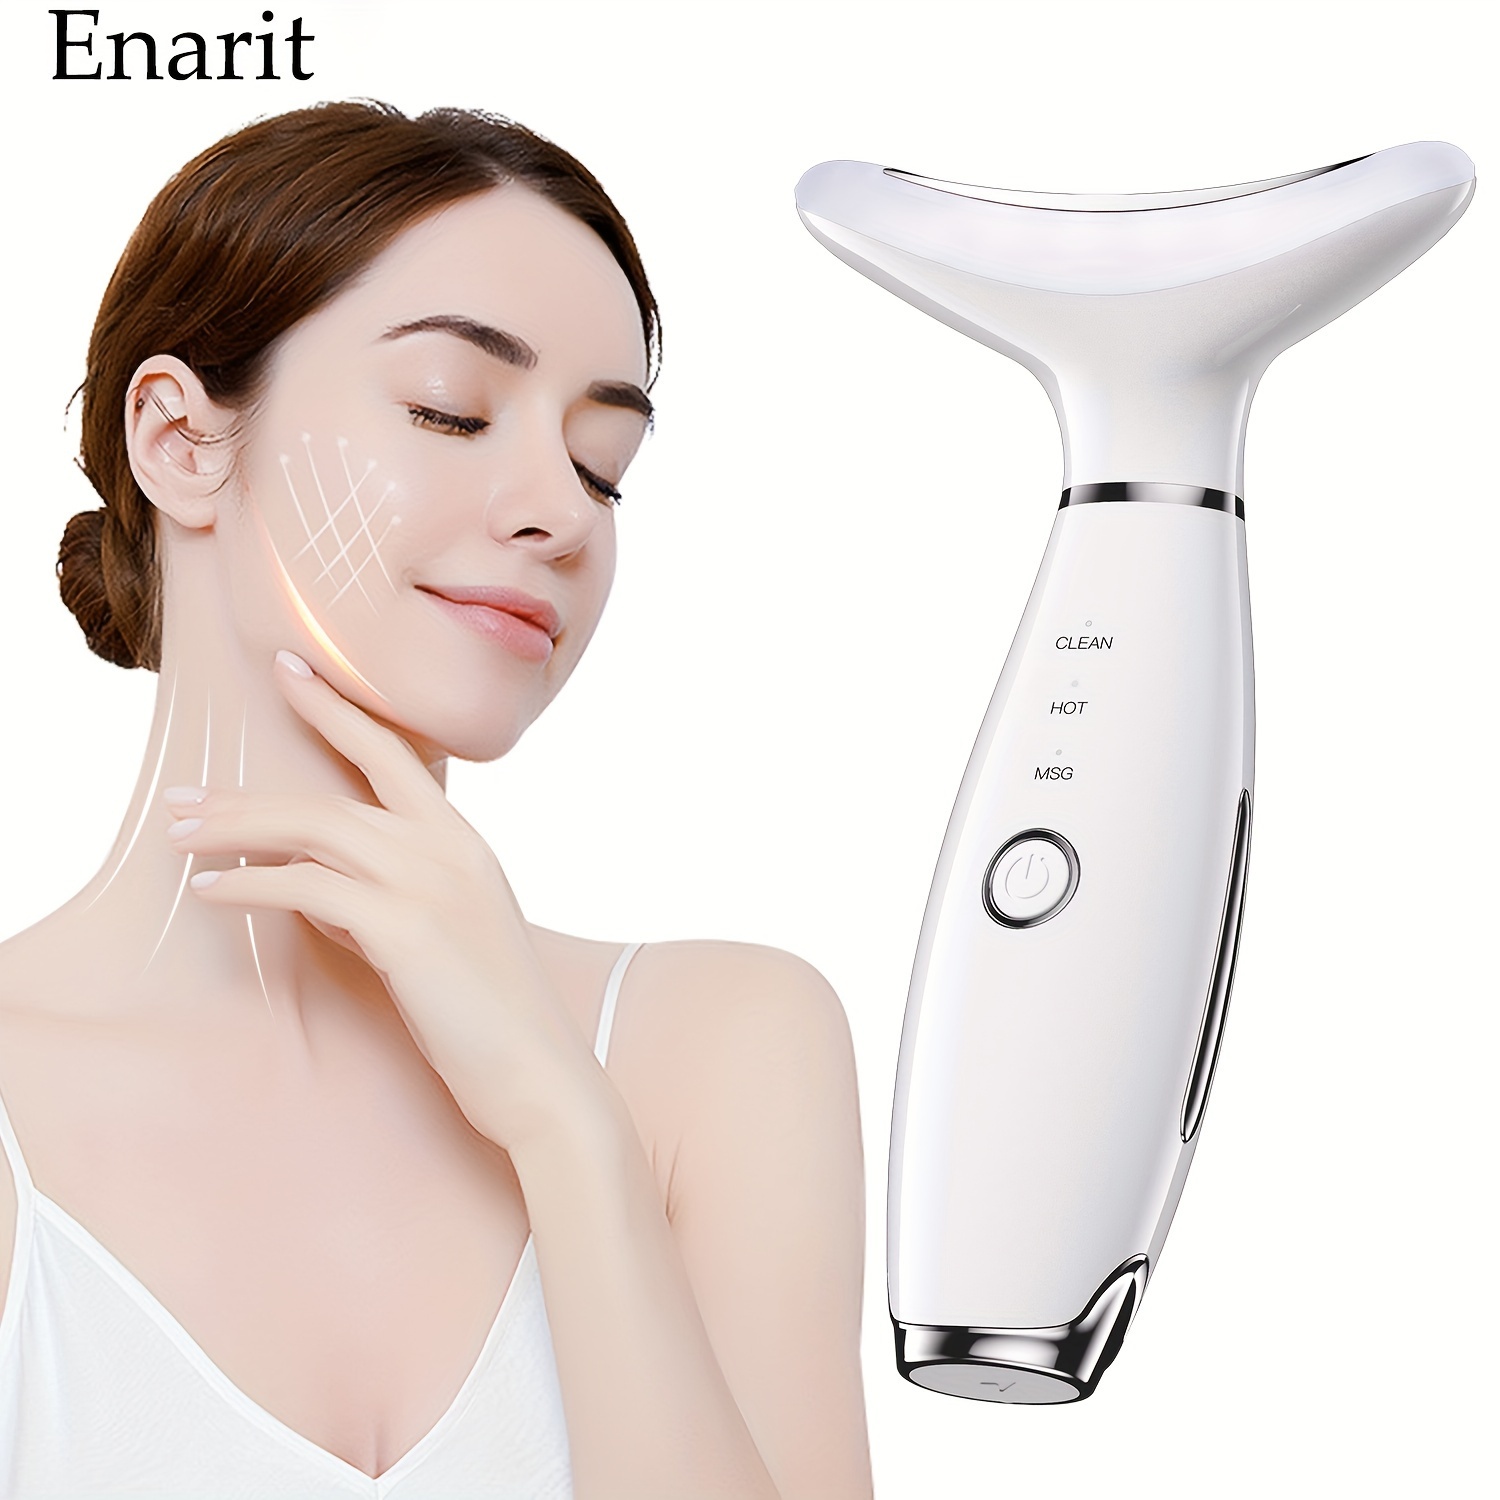 

Enarit Electric Face And Neck Skin Care Beauty Massager, Adjustable Heating Vibration Massage Mode, Convenient Home Use Neck Facial Beauty Instrument, Women's